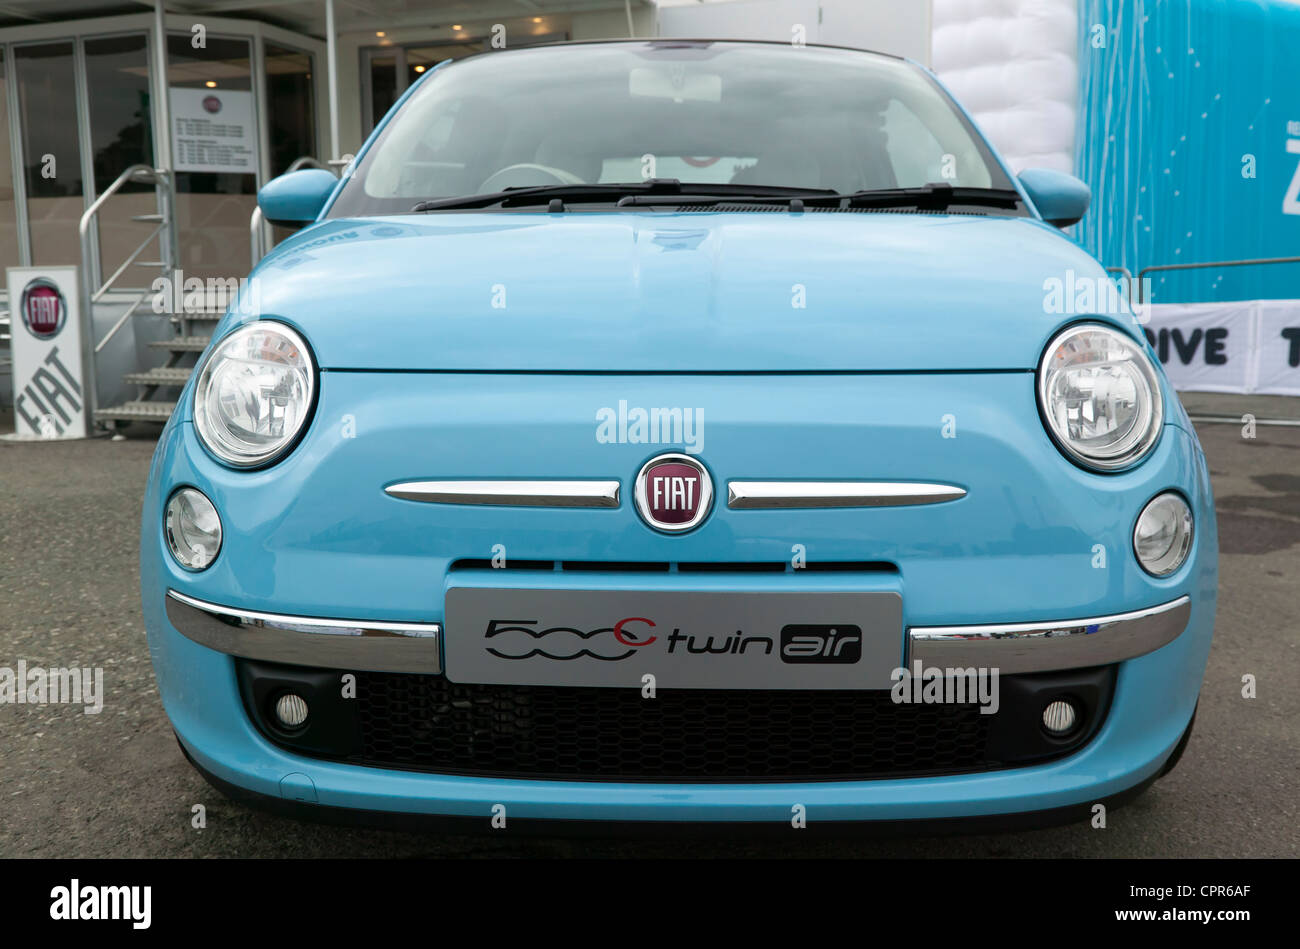 Front view of the Fiat 500 Twin Air on display at ecovelocity 2011 Stock Photo